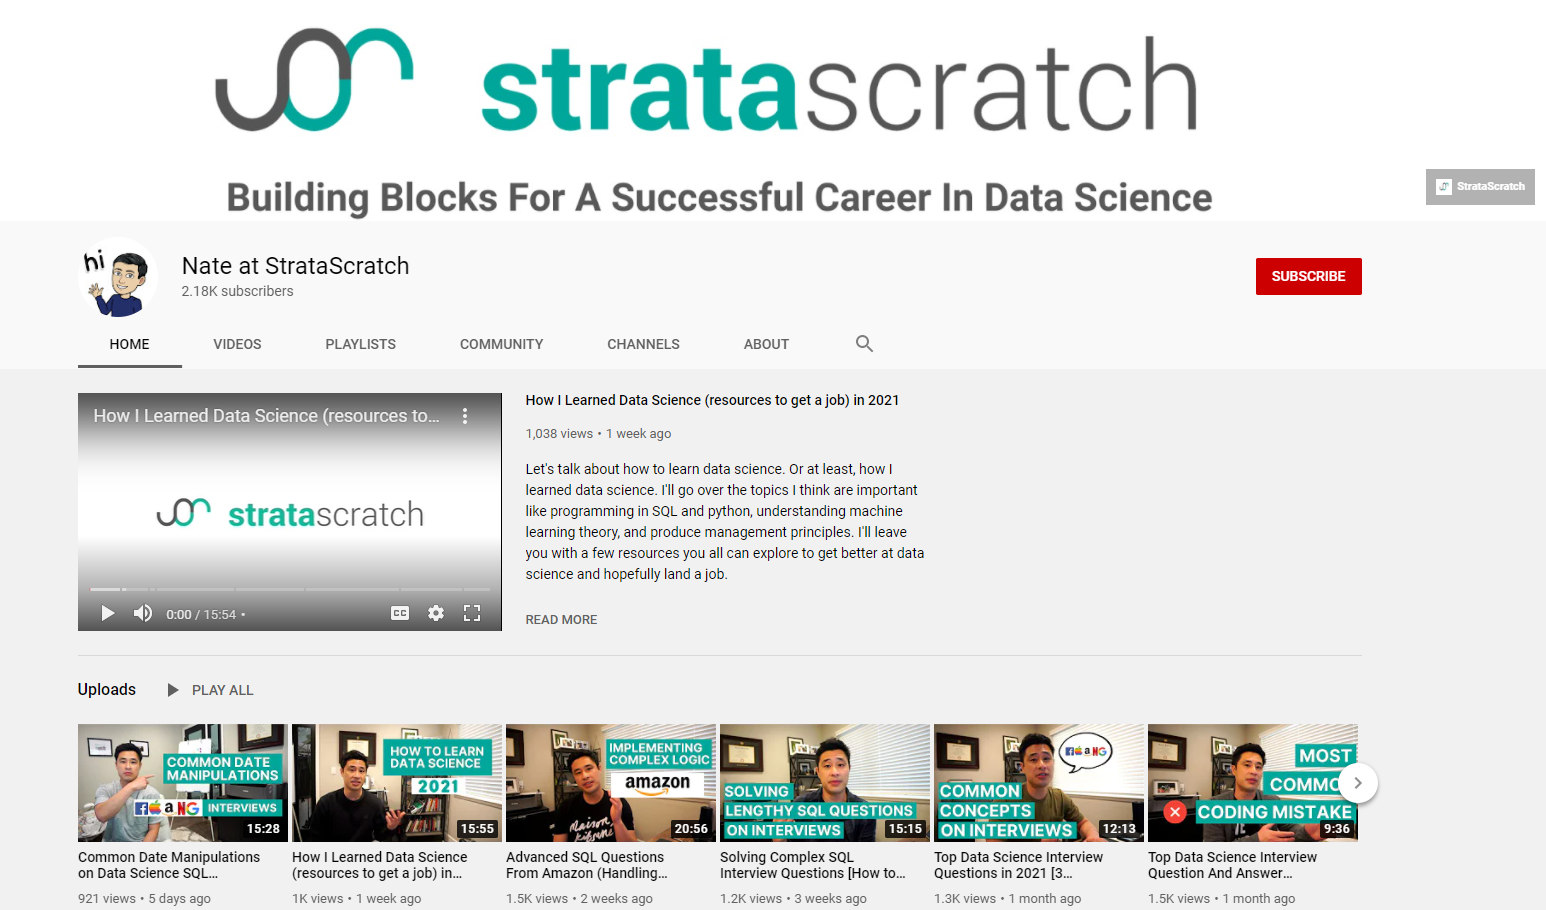 stratascratch youtube channel for data science questions